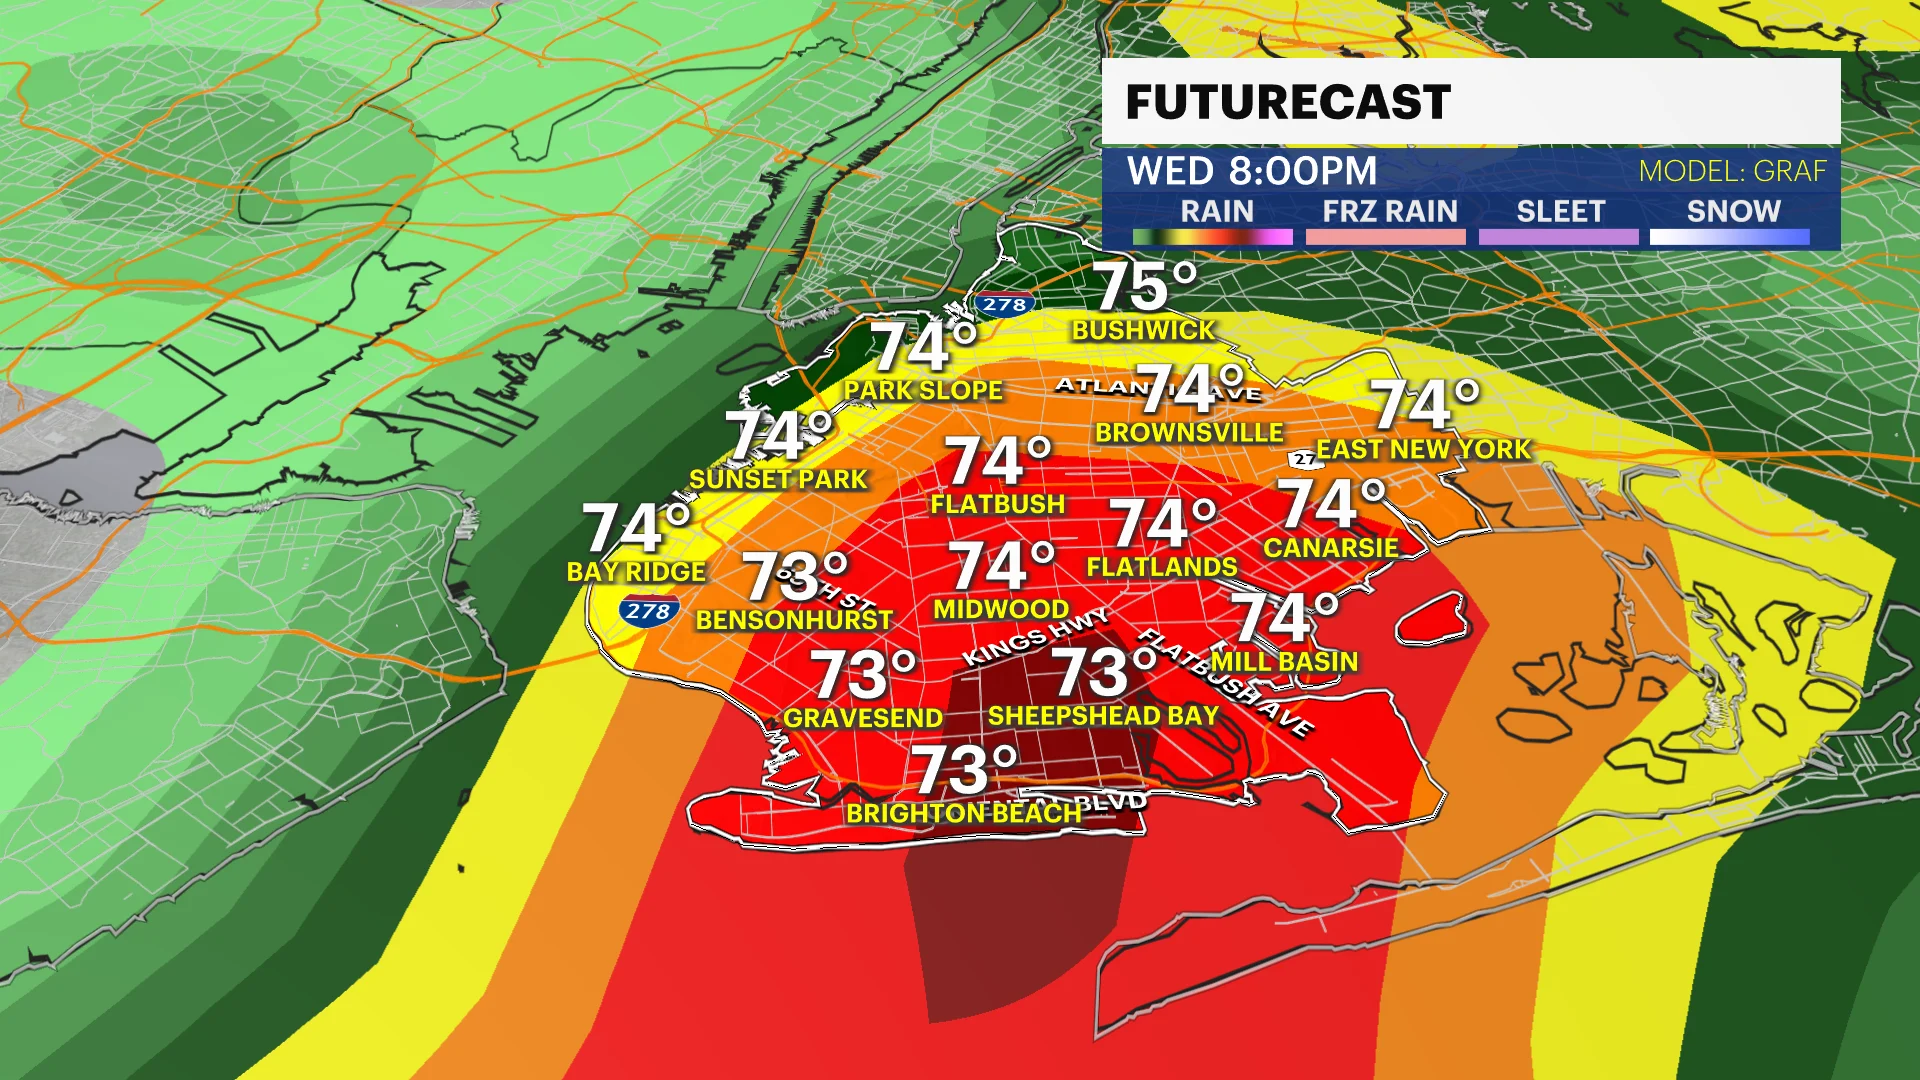 Hot and sunny conditions for Brooklyn; tracking heavy rain and wind for Wednesday night